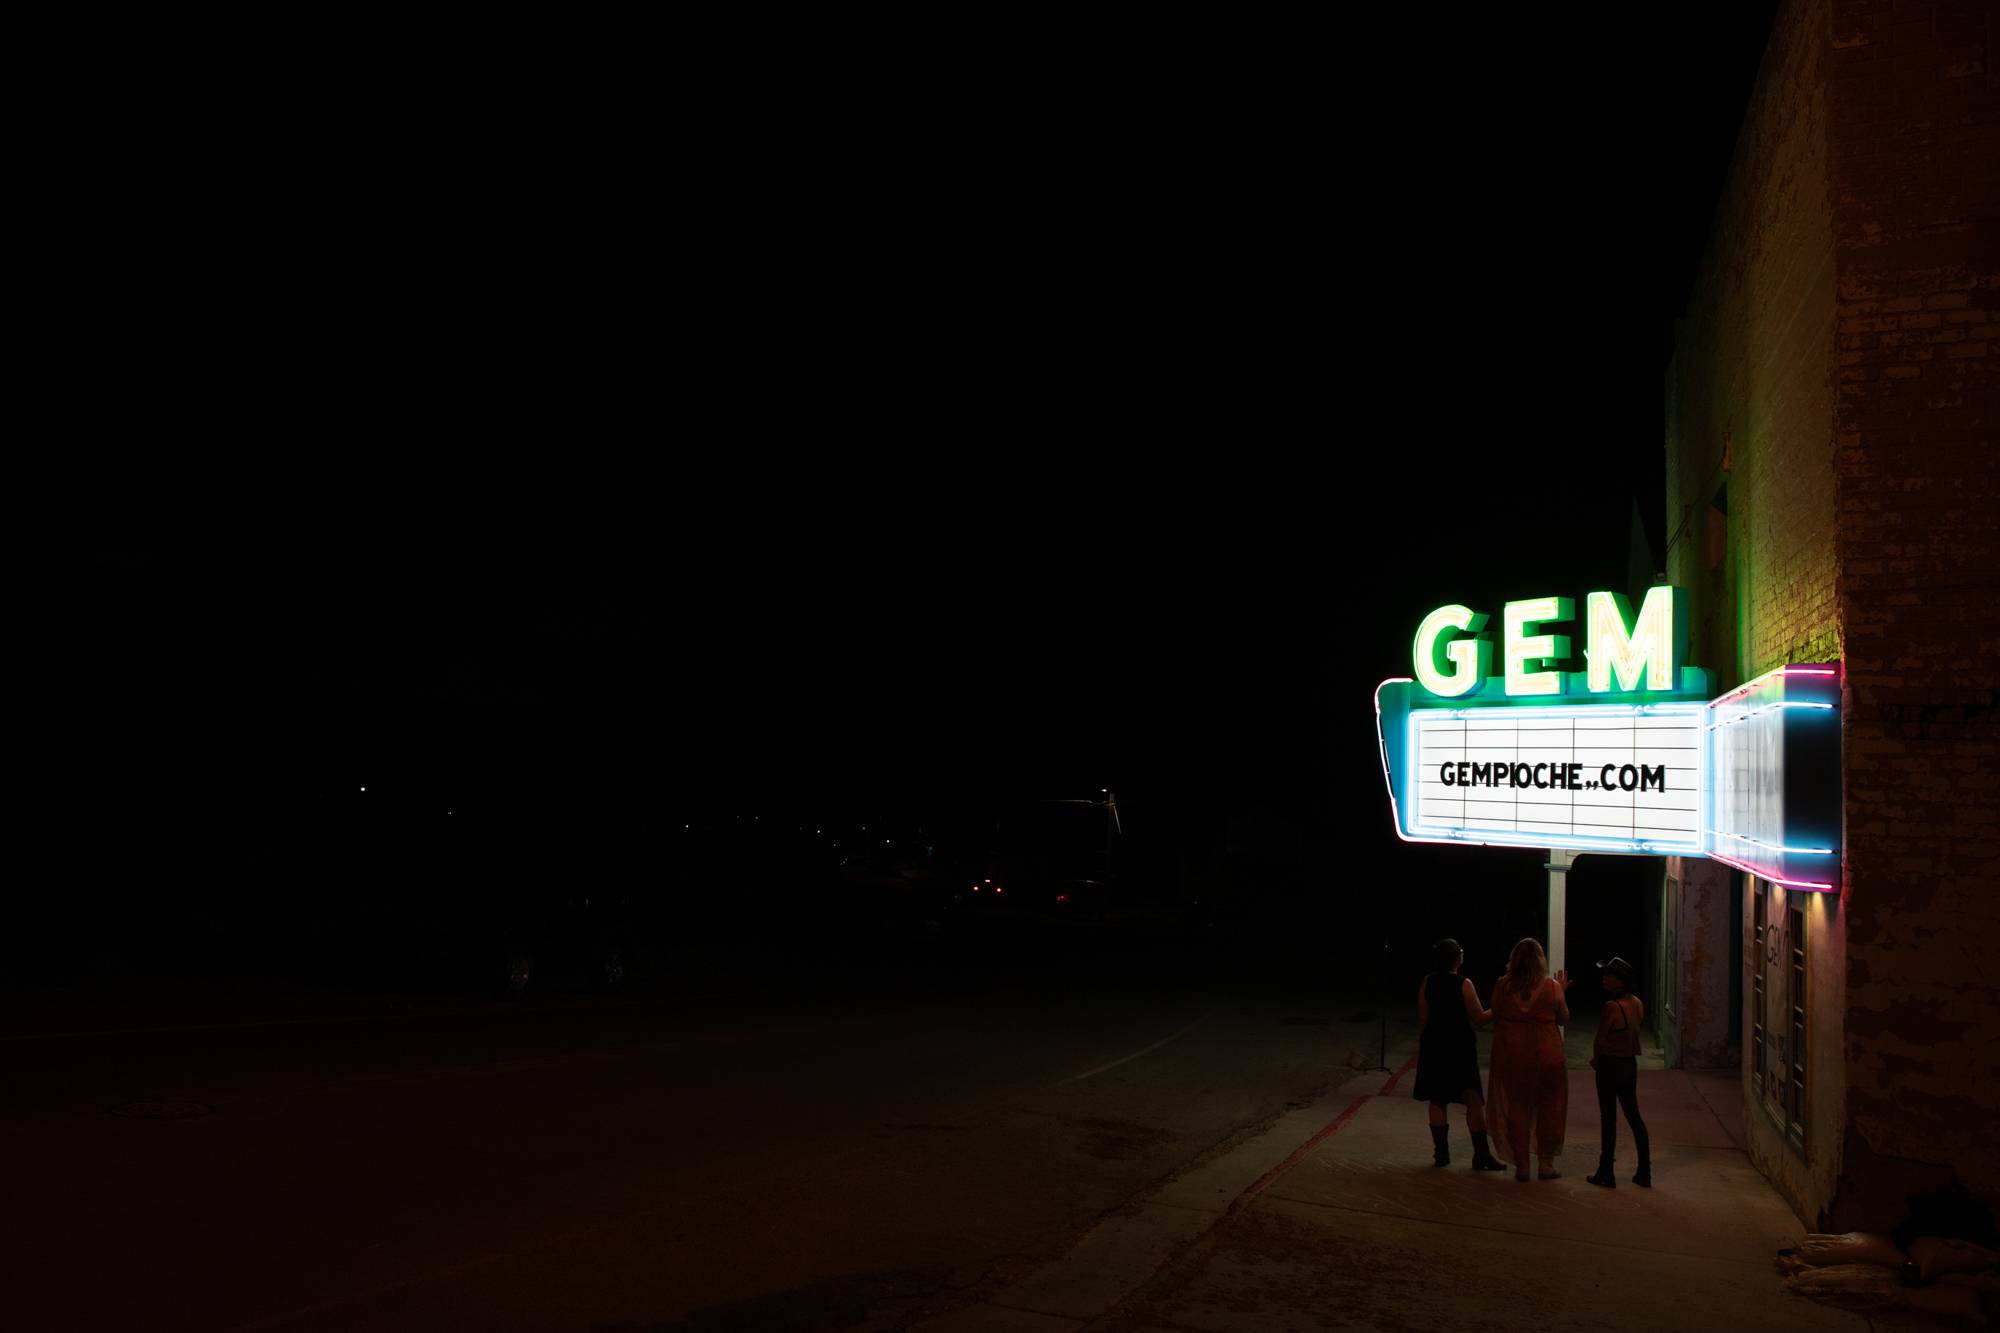 Melissa Clary speaks with friends while looking at the Gem Theater sign after the Gem Theater marquee lighting ceremony on Saturday, June 25, 2022, in Pioche, Nevada. The theater has not shown a movie since 2002. Clary bought the theater in 2020 and hopes it will open within the next five years.